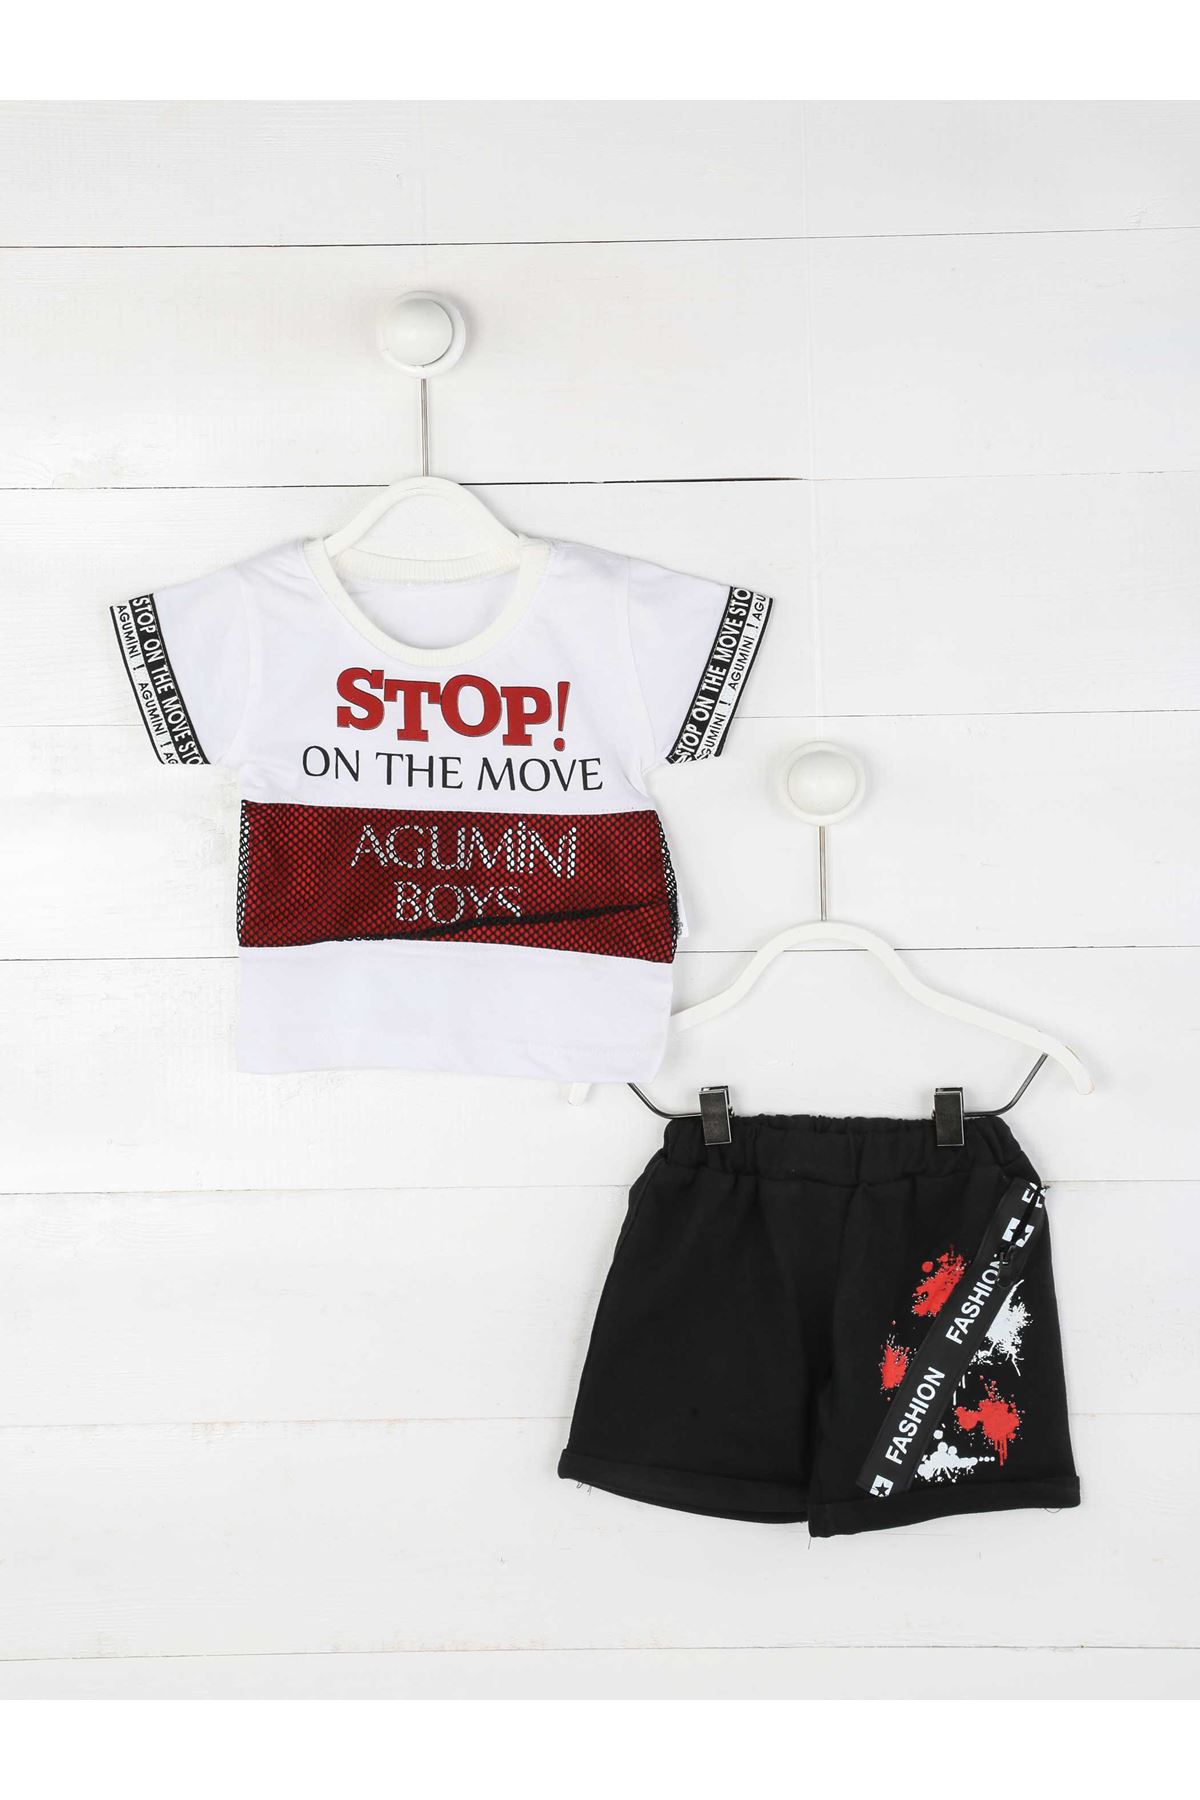 Baby Boy Claret Red Bottom Top Summer Gentleman Babies Cute Casual Casual Cotton Clothing Sets Models and Types